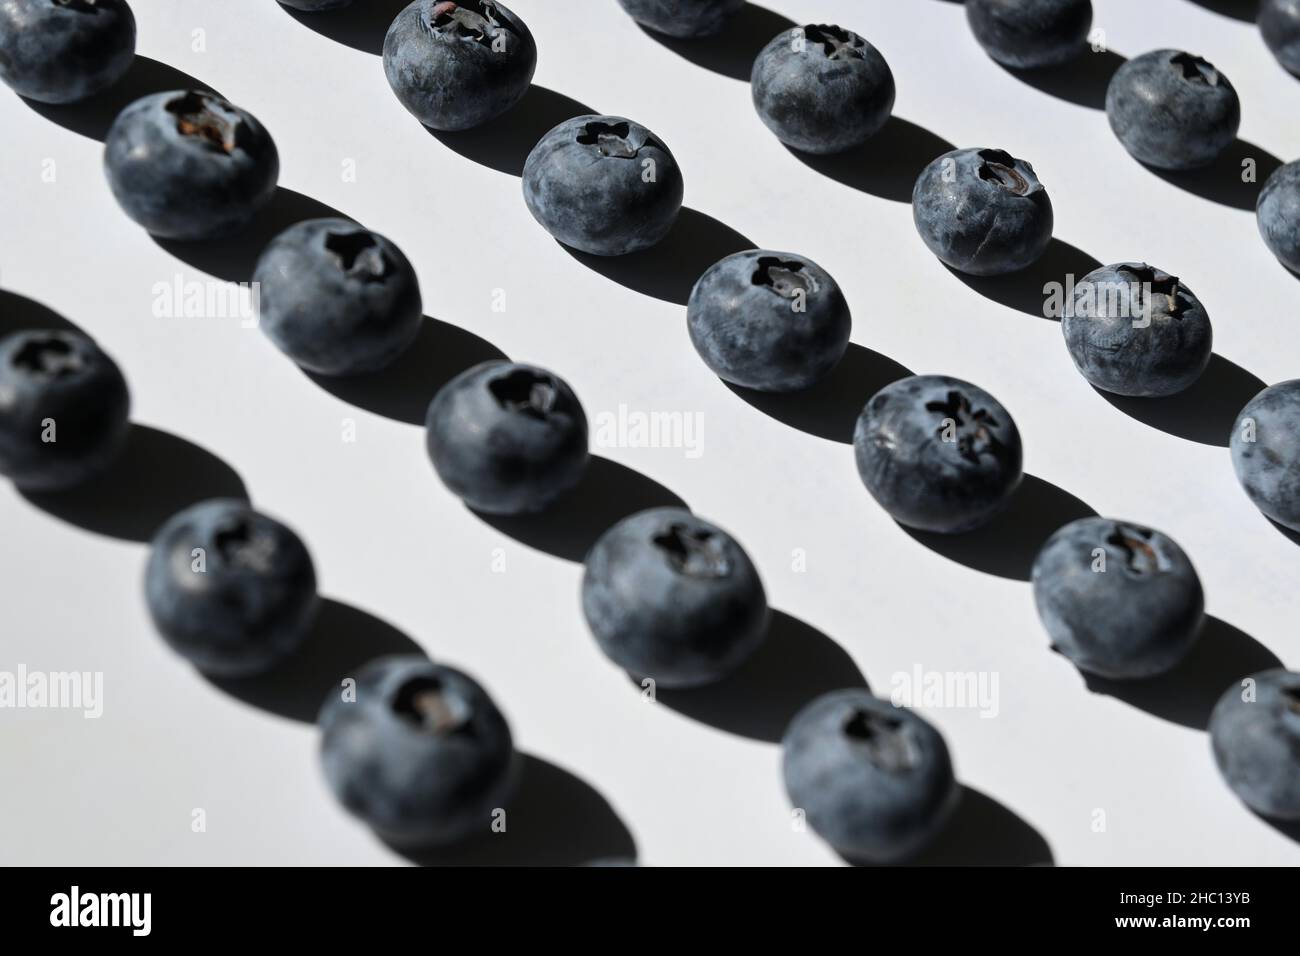 Artistic photograph of blueberries with hard shadows on white background. Stock Photo